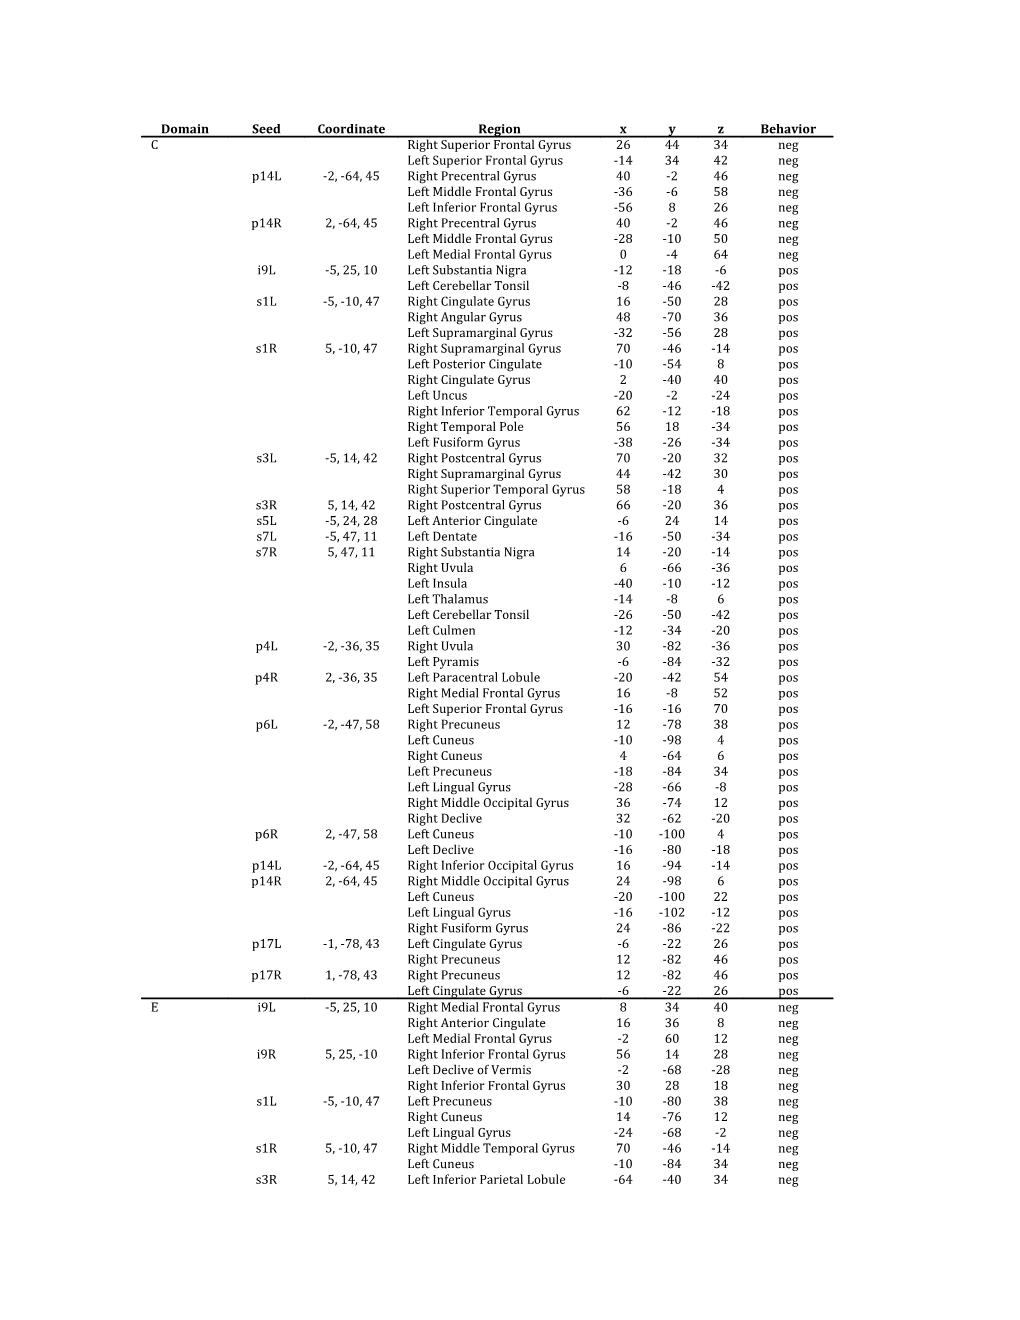 Table of Local Peaks Associated with Each Seed-RSFC Relationship for Each Domain of Personality